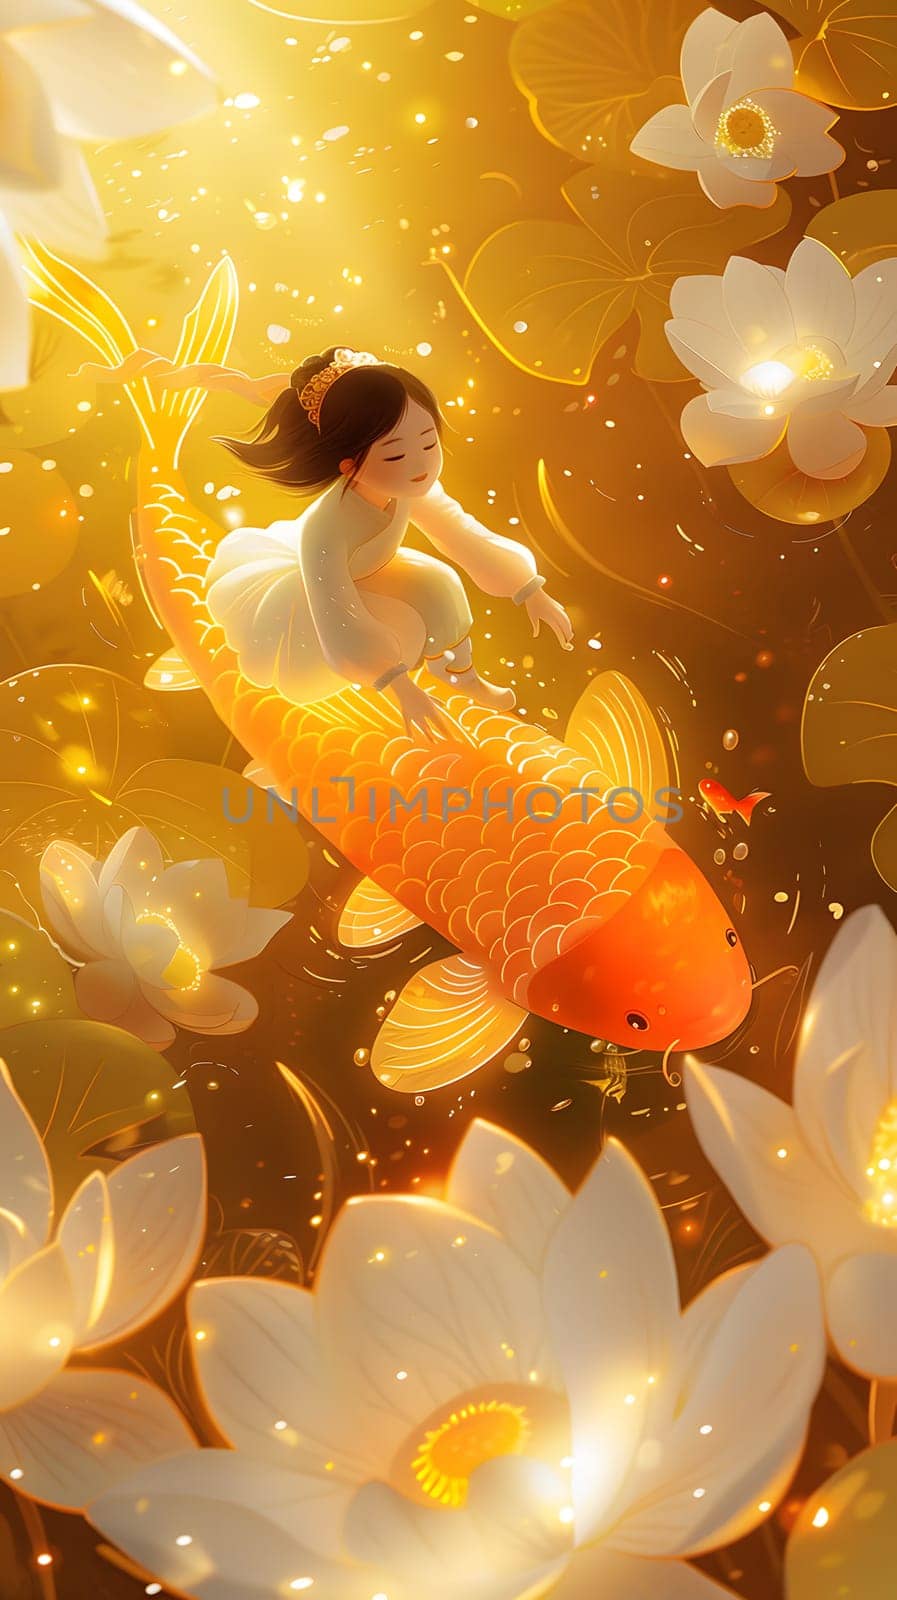 A small girl is seated atop a goldfish in a pond filled with lotus flowers. The amber fish swims gracefully among the orange petals, illuminated by sunlight filtering through the water